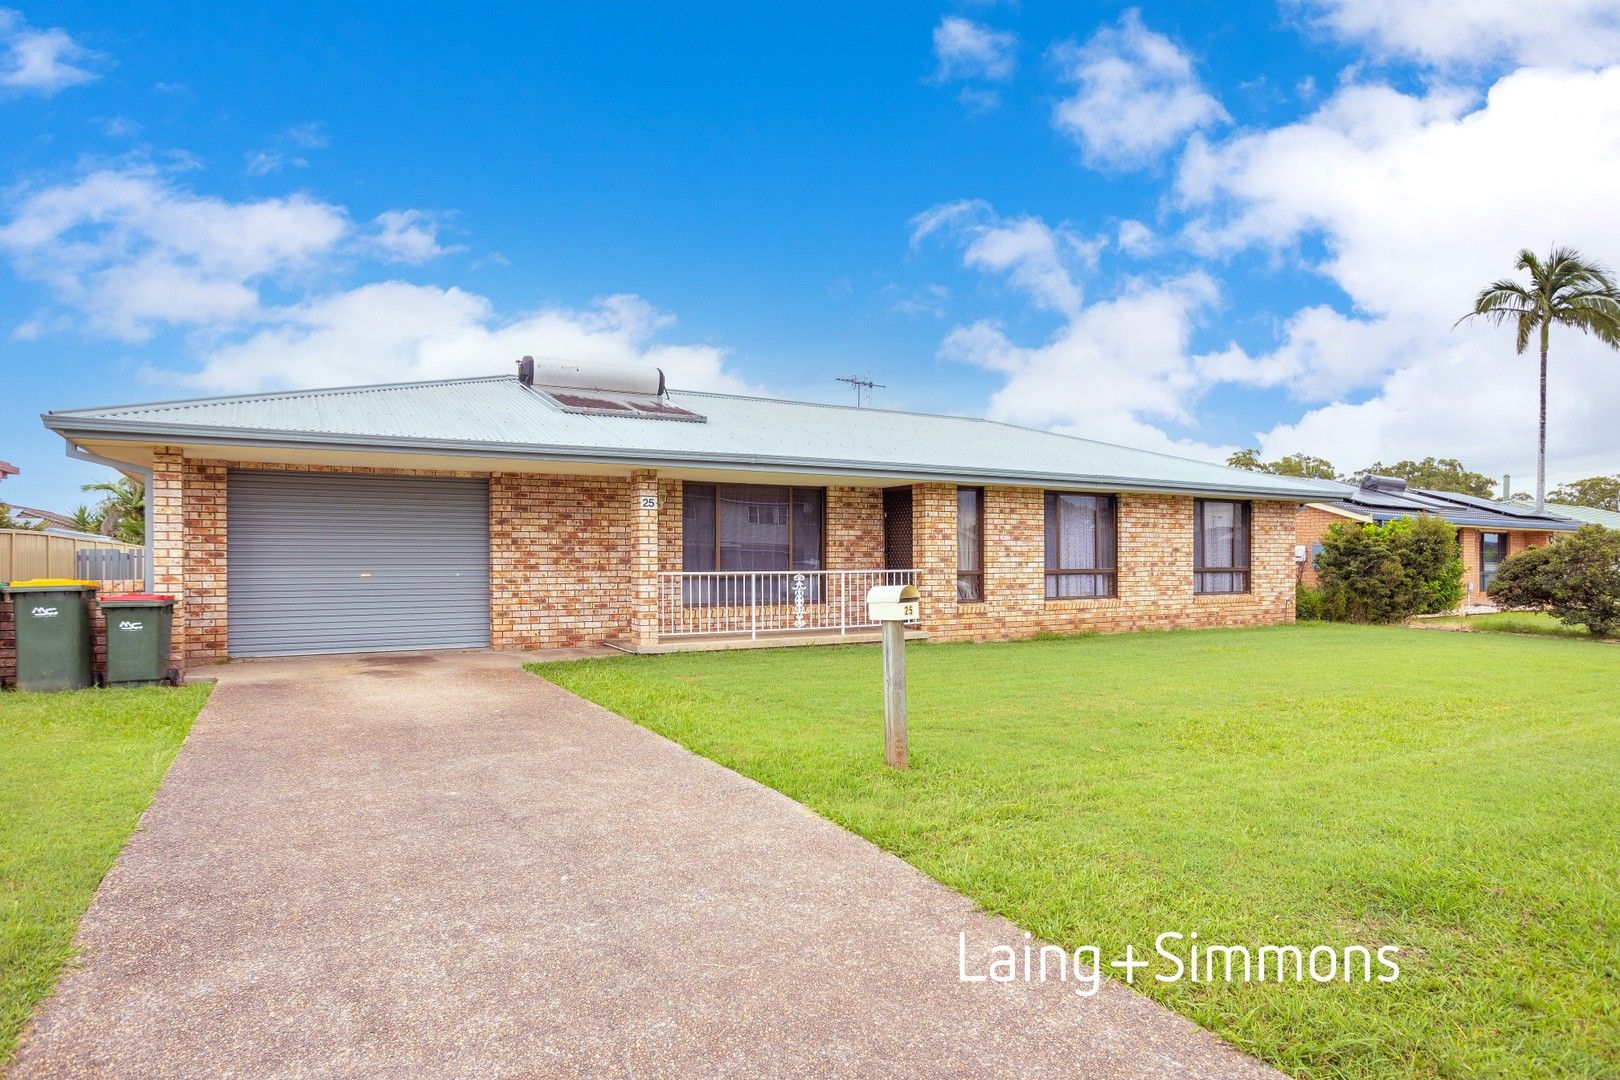 3 bedrooms House in 25 Hickory Crescent TAREE NSW, 2430